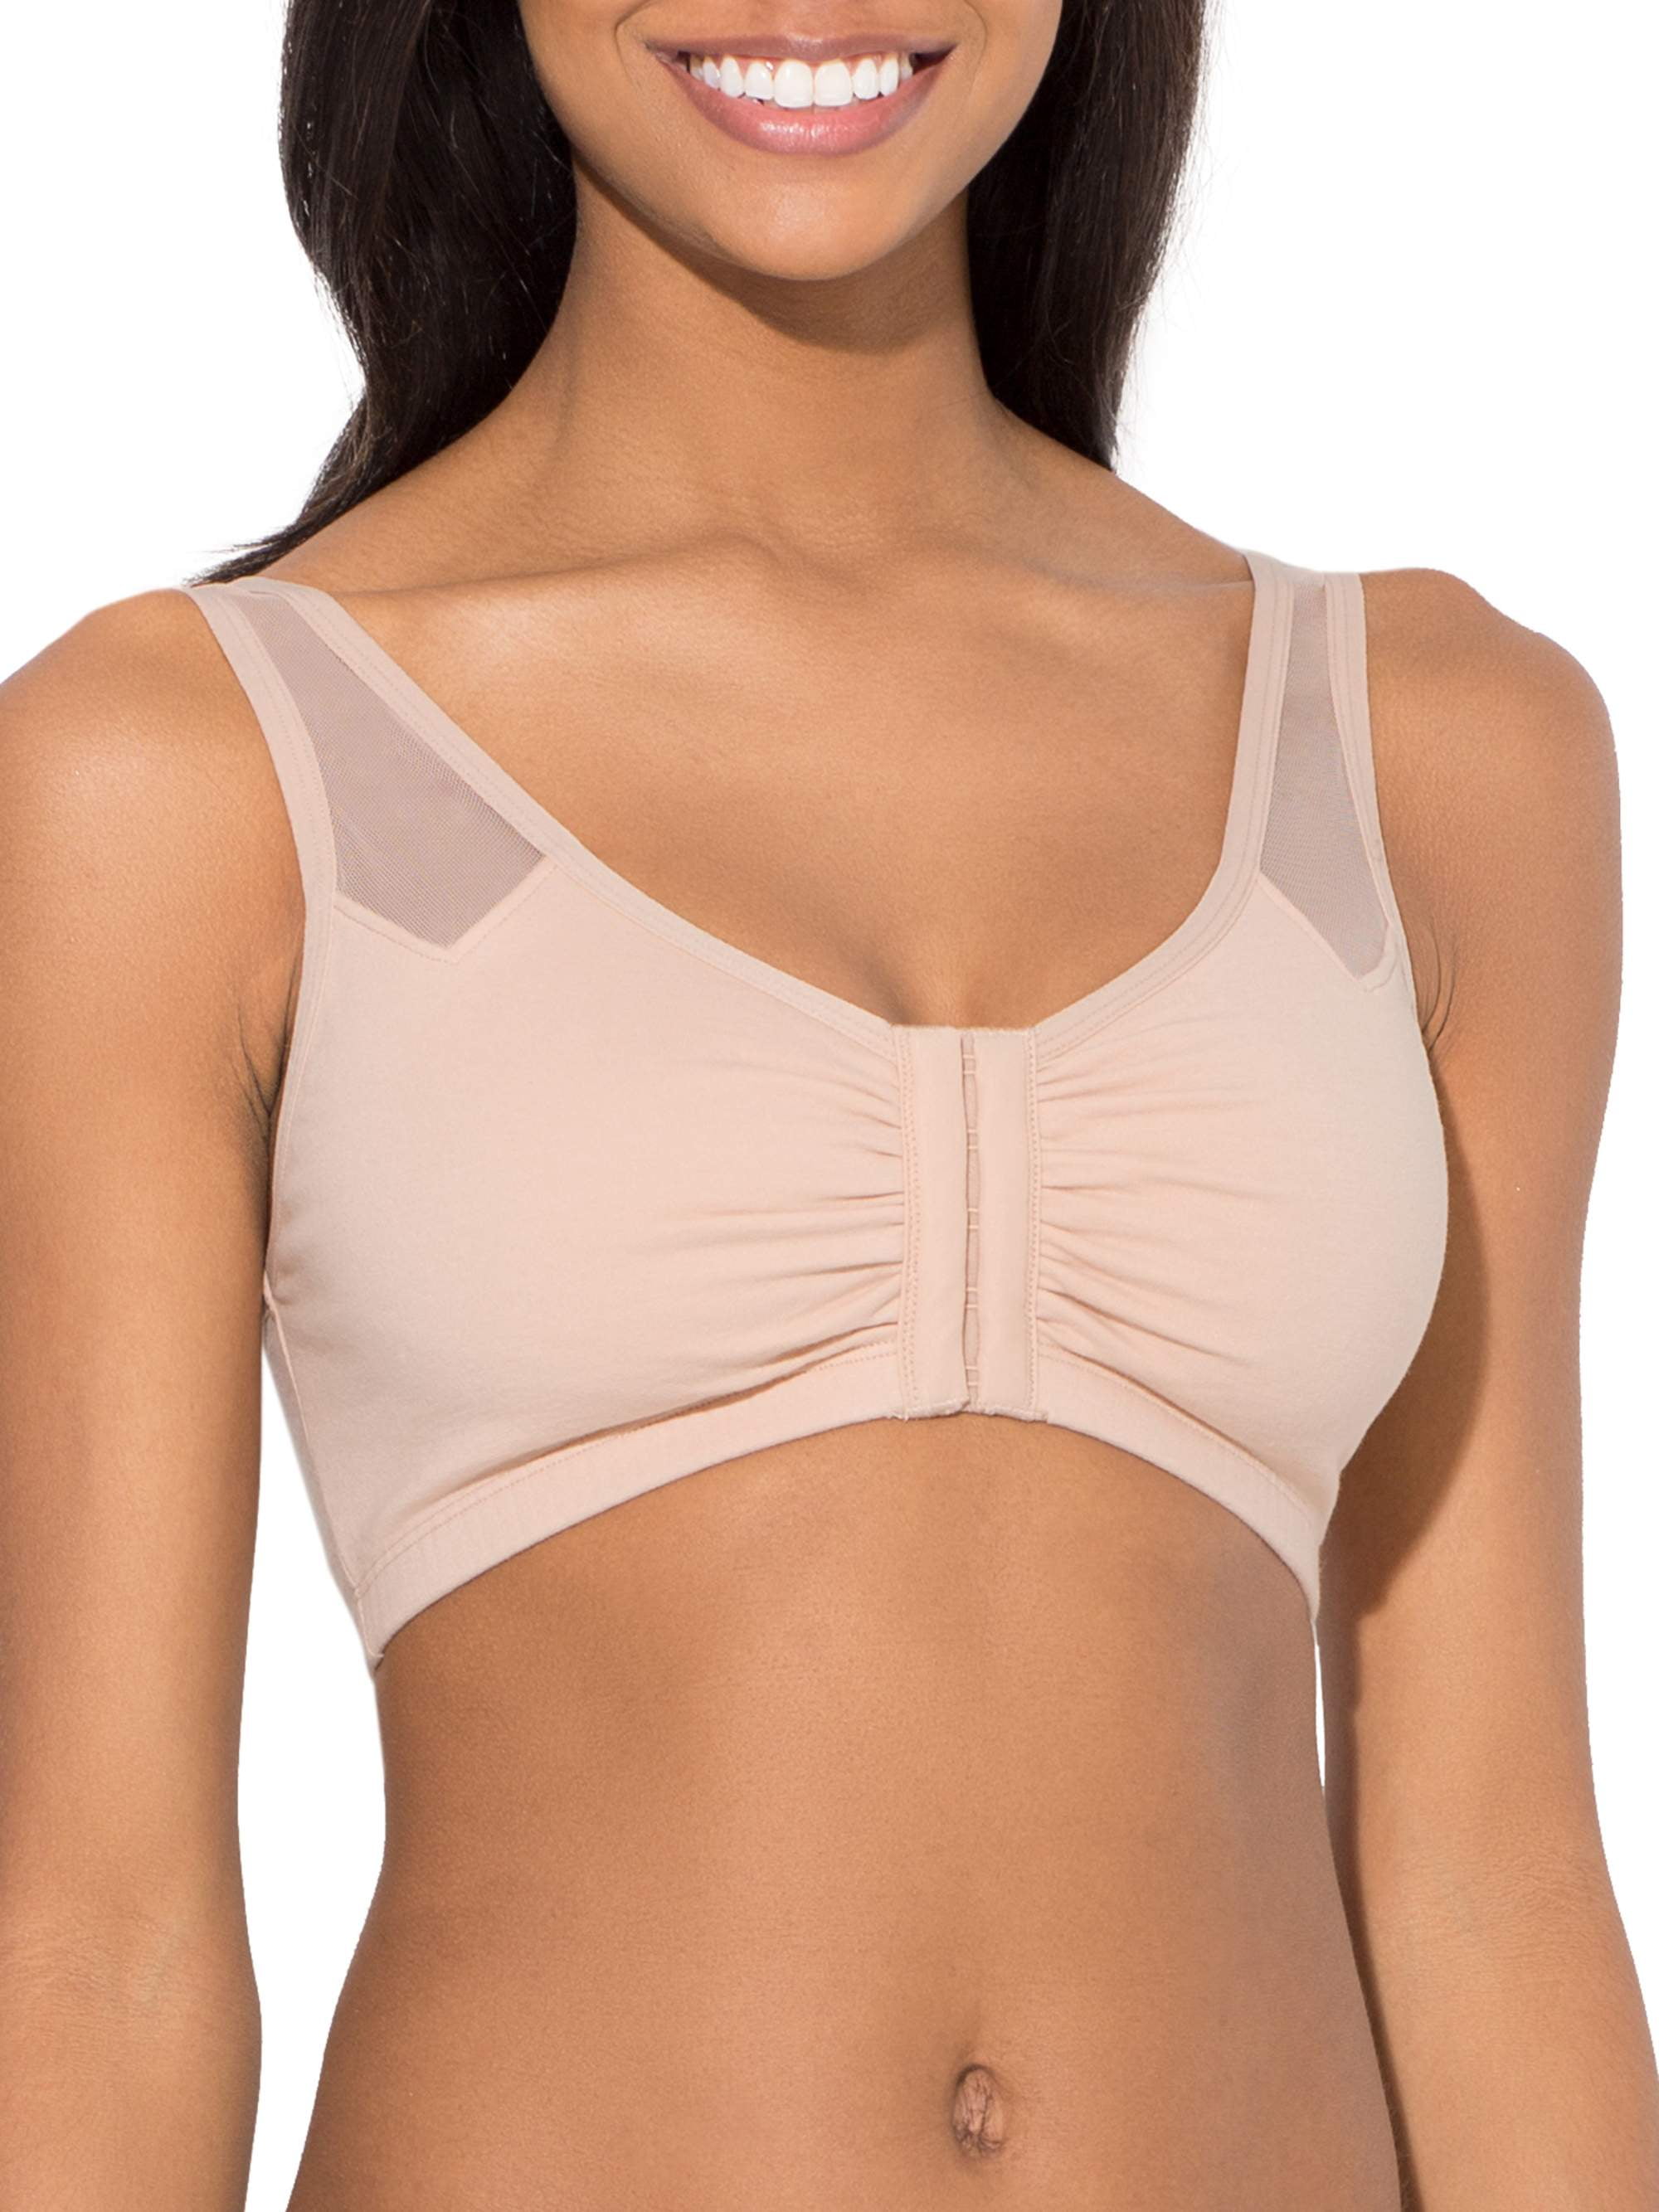 Fruit of the Loom Comfort Front Close Sport Bra with Mesh Straps Bra 